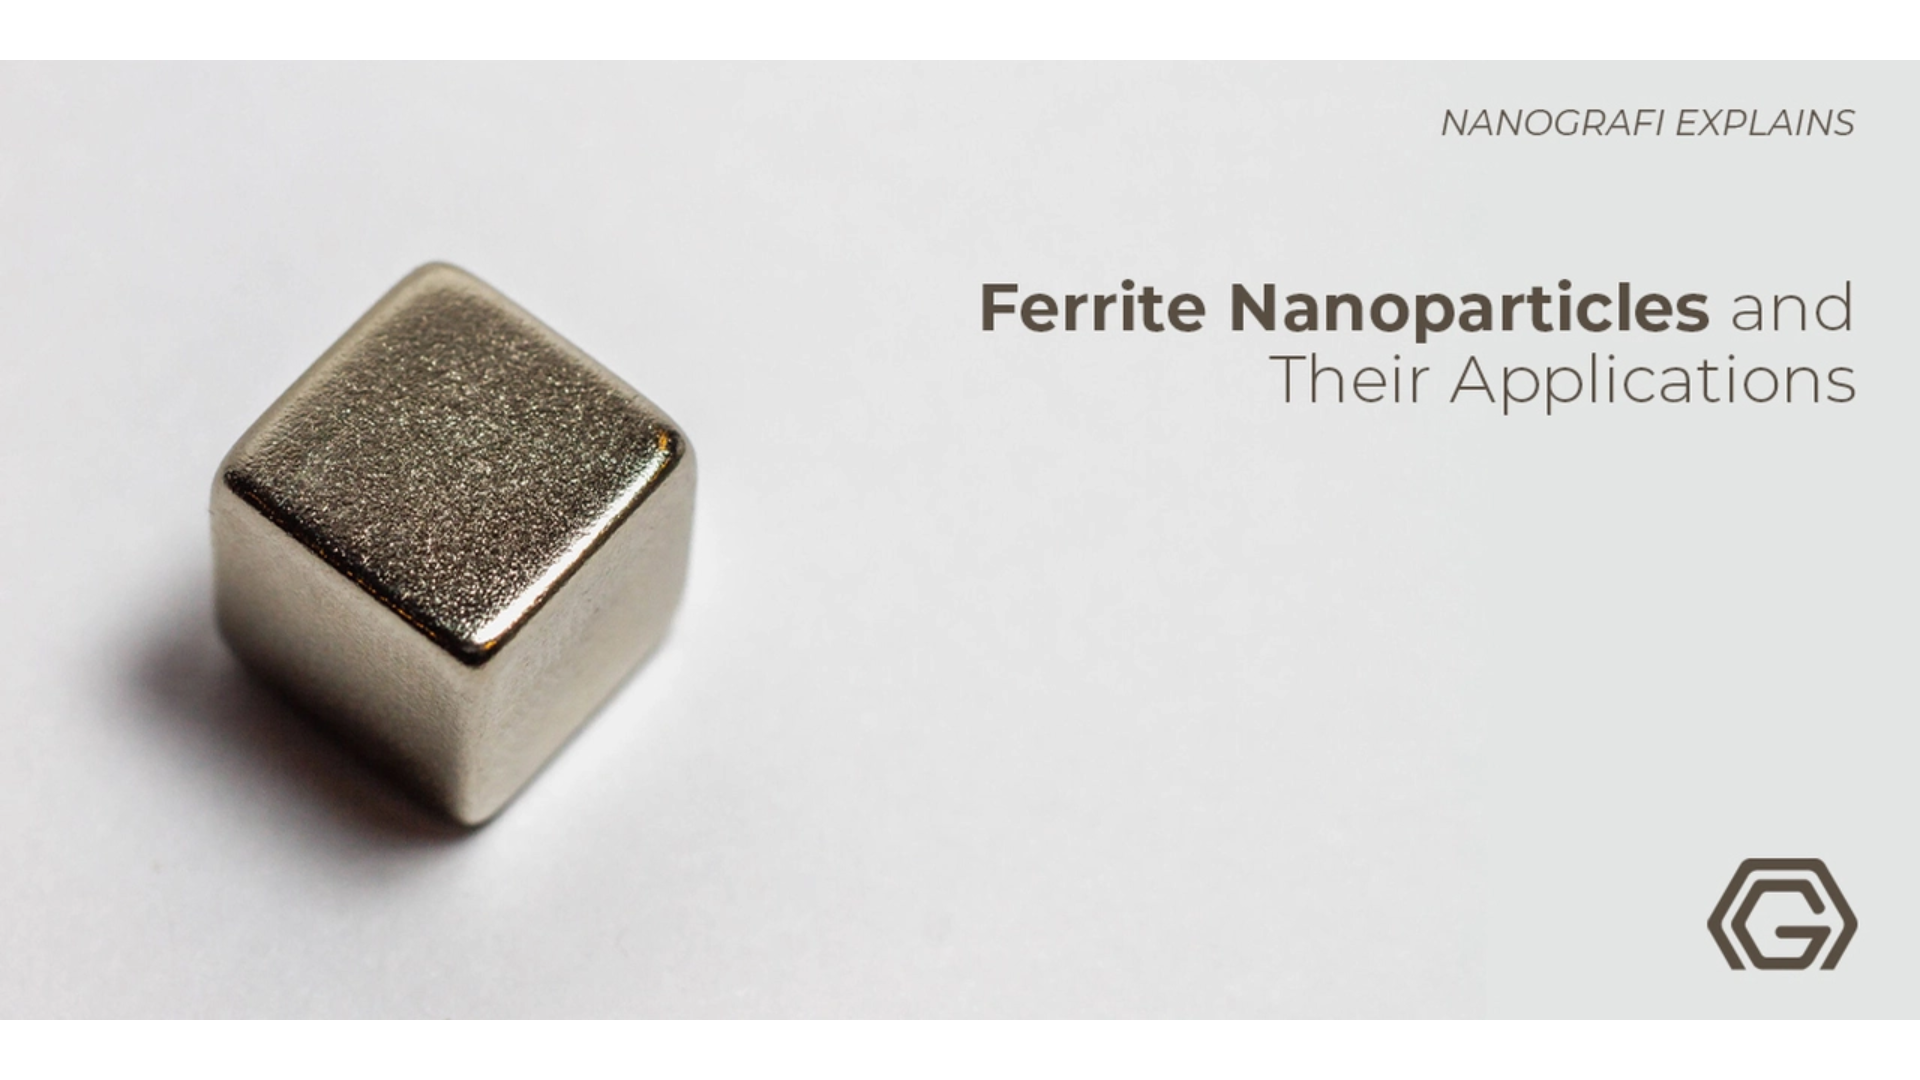 Ferrite nanoparticles and applications